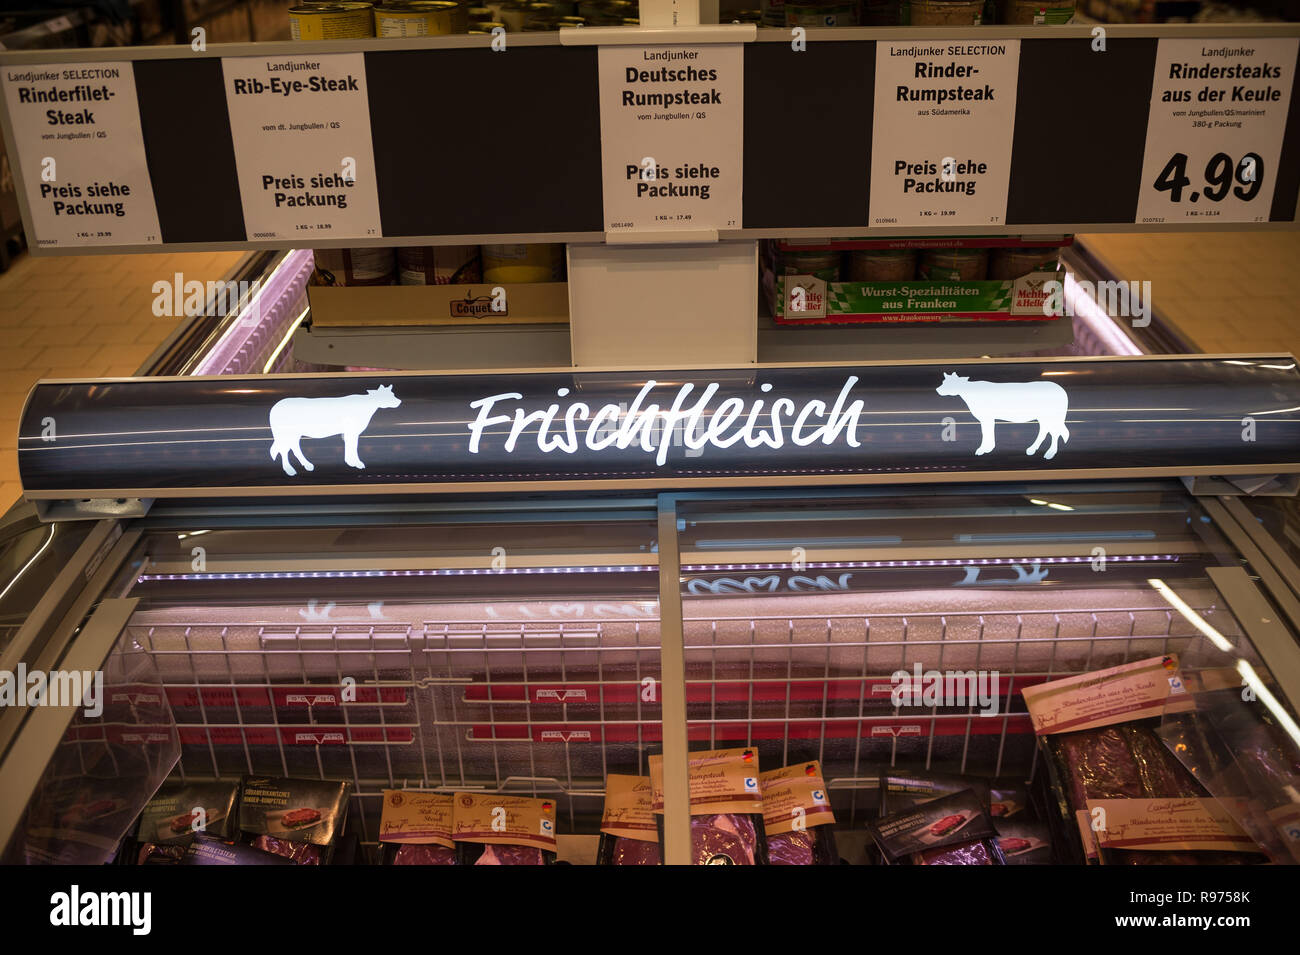 09.06.2017, Cologne, Northrhine-Westphalia, Germany, Europe - Packaged beef inside a freezer cabinet at a supermarket in Cologne. Stock Photo